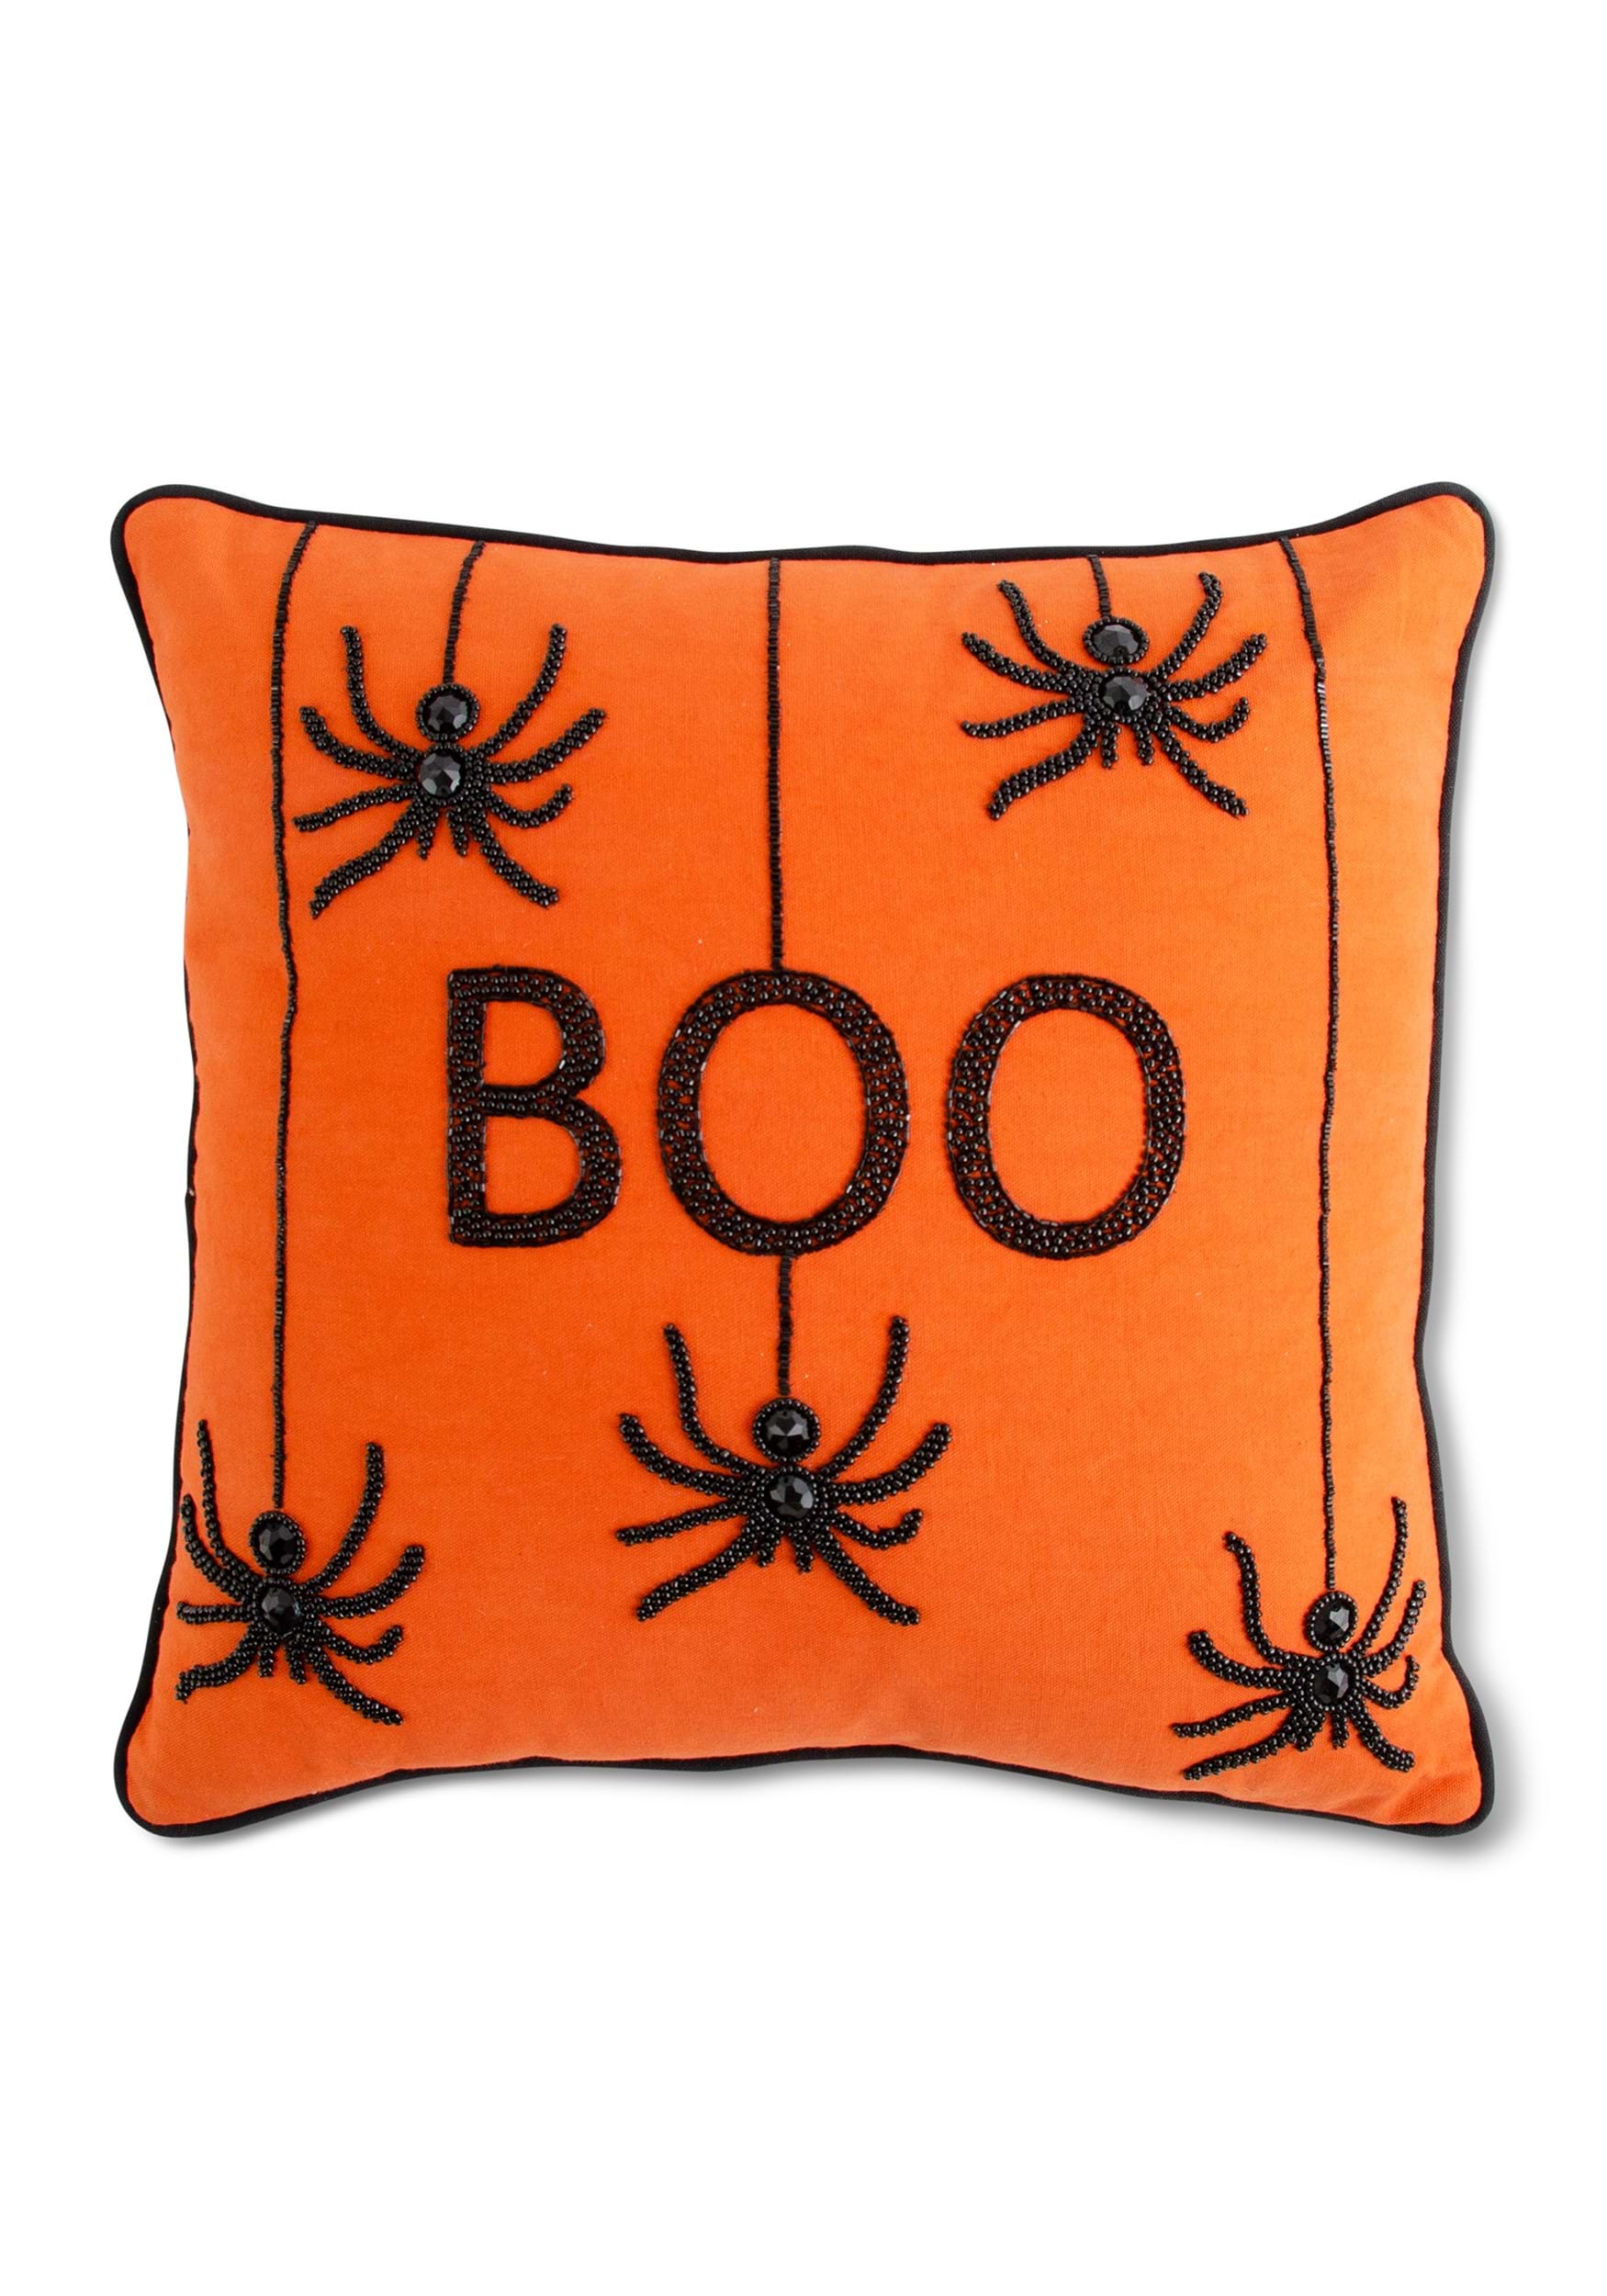 18-Inch Orange Square Beaded BOO Pillow With Spiders